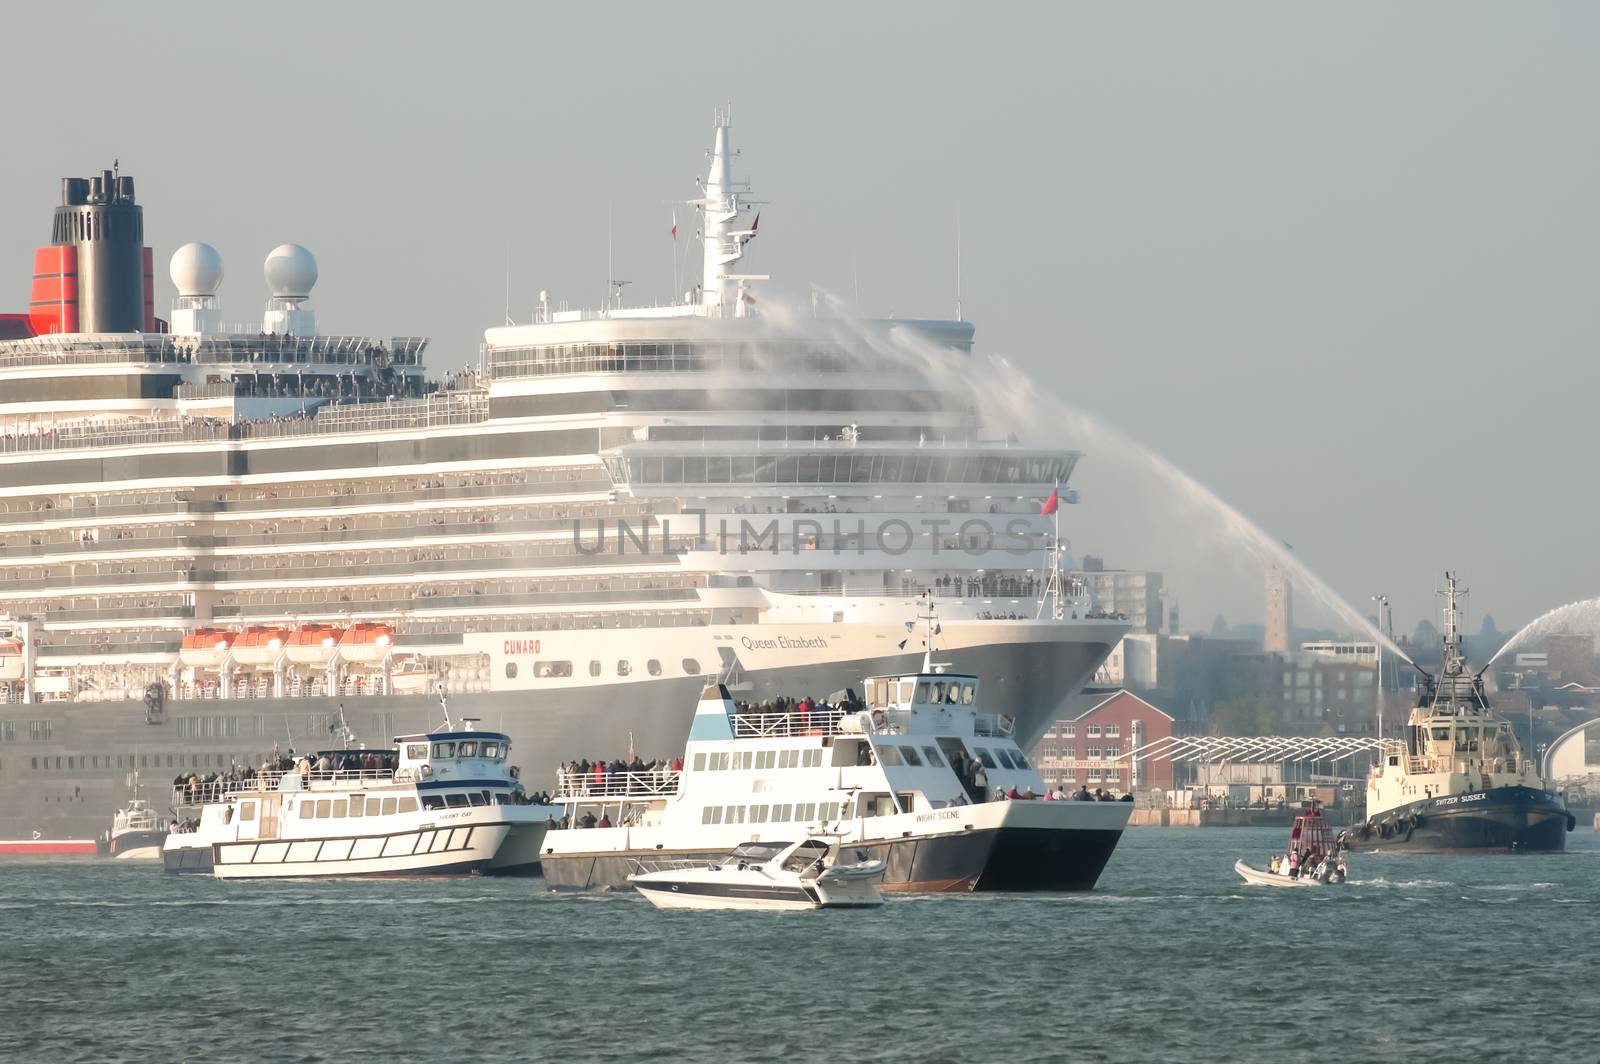 Southampton, UK - October 12, 2010: Flotilla escort of small boats for the Queen Elizabeth ocean cruise liner on her maiden voyage from Southampton, UK